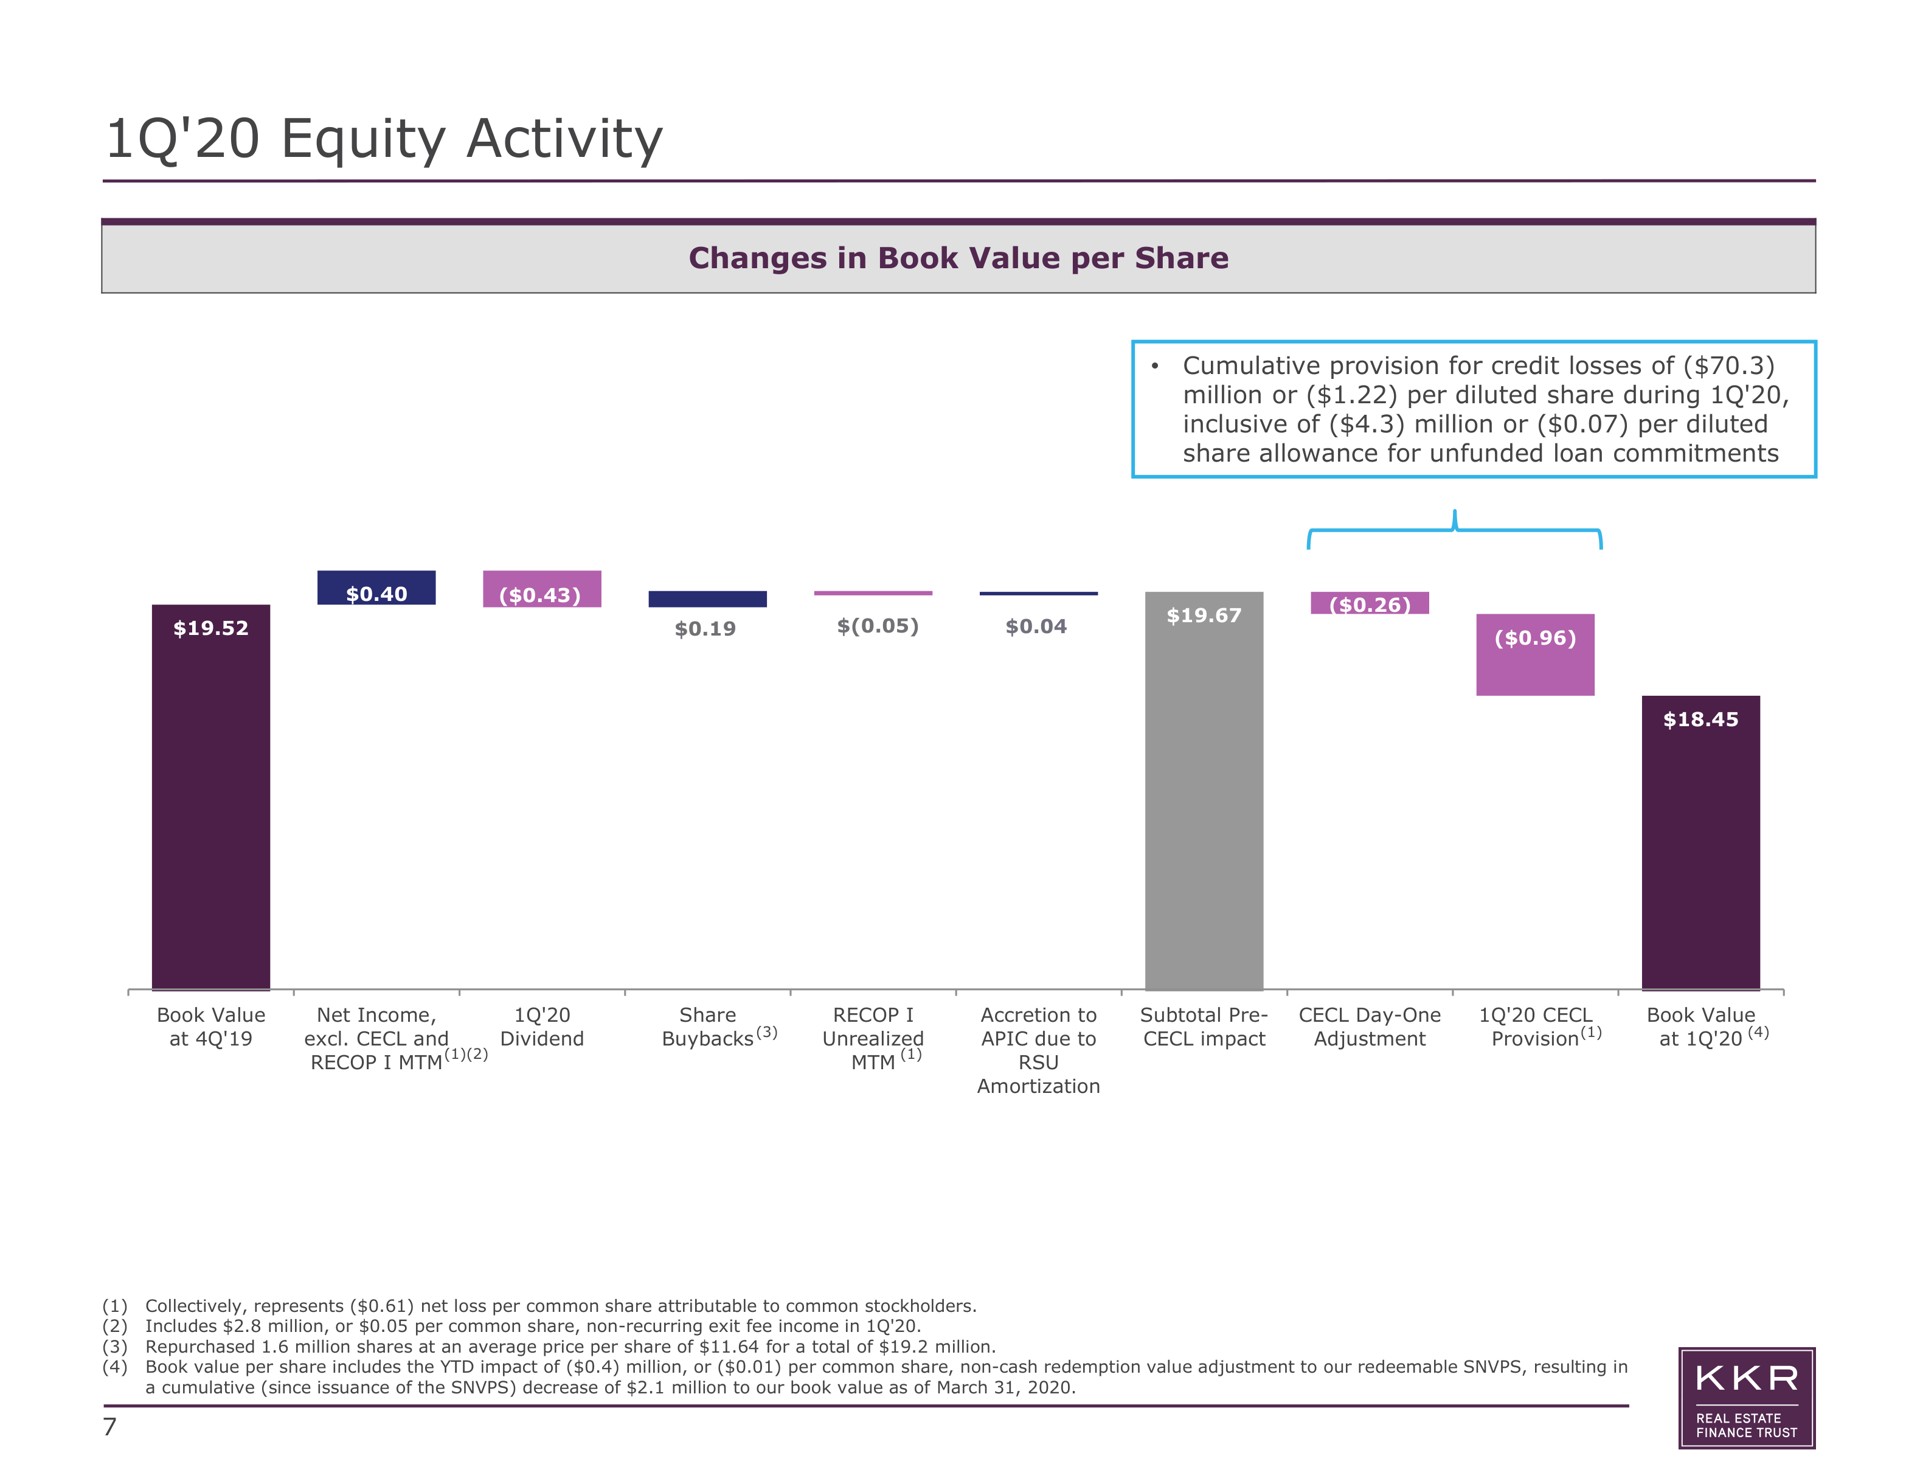 equity activity changes in book value per share | KKR Real Estate Finance Trust